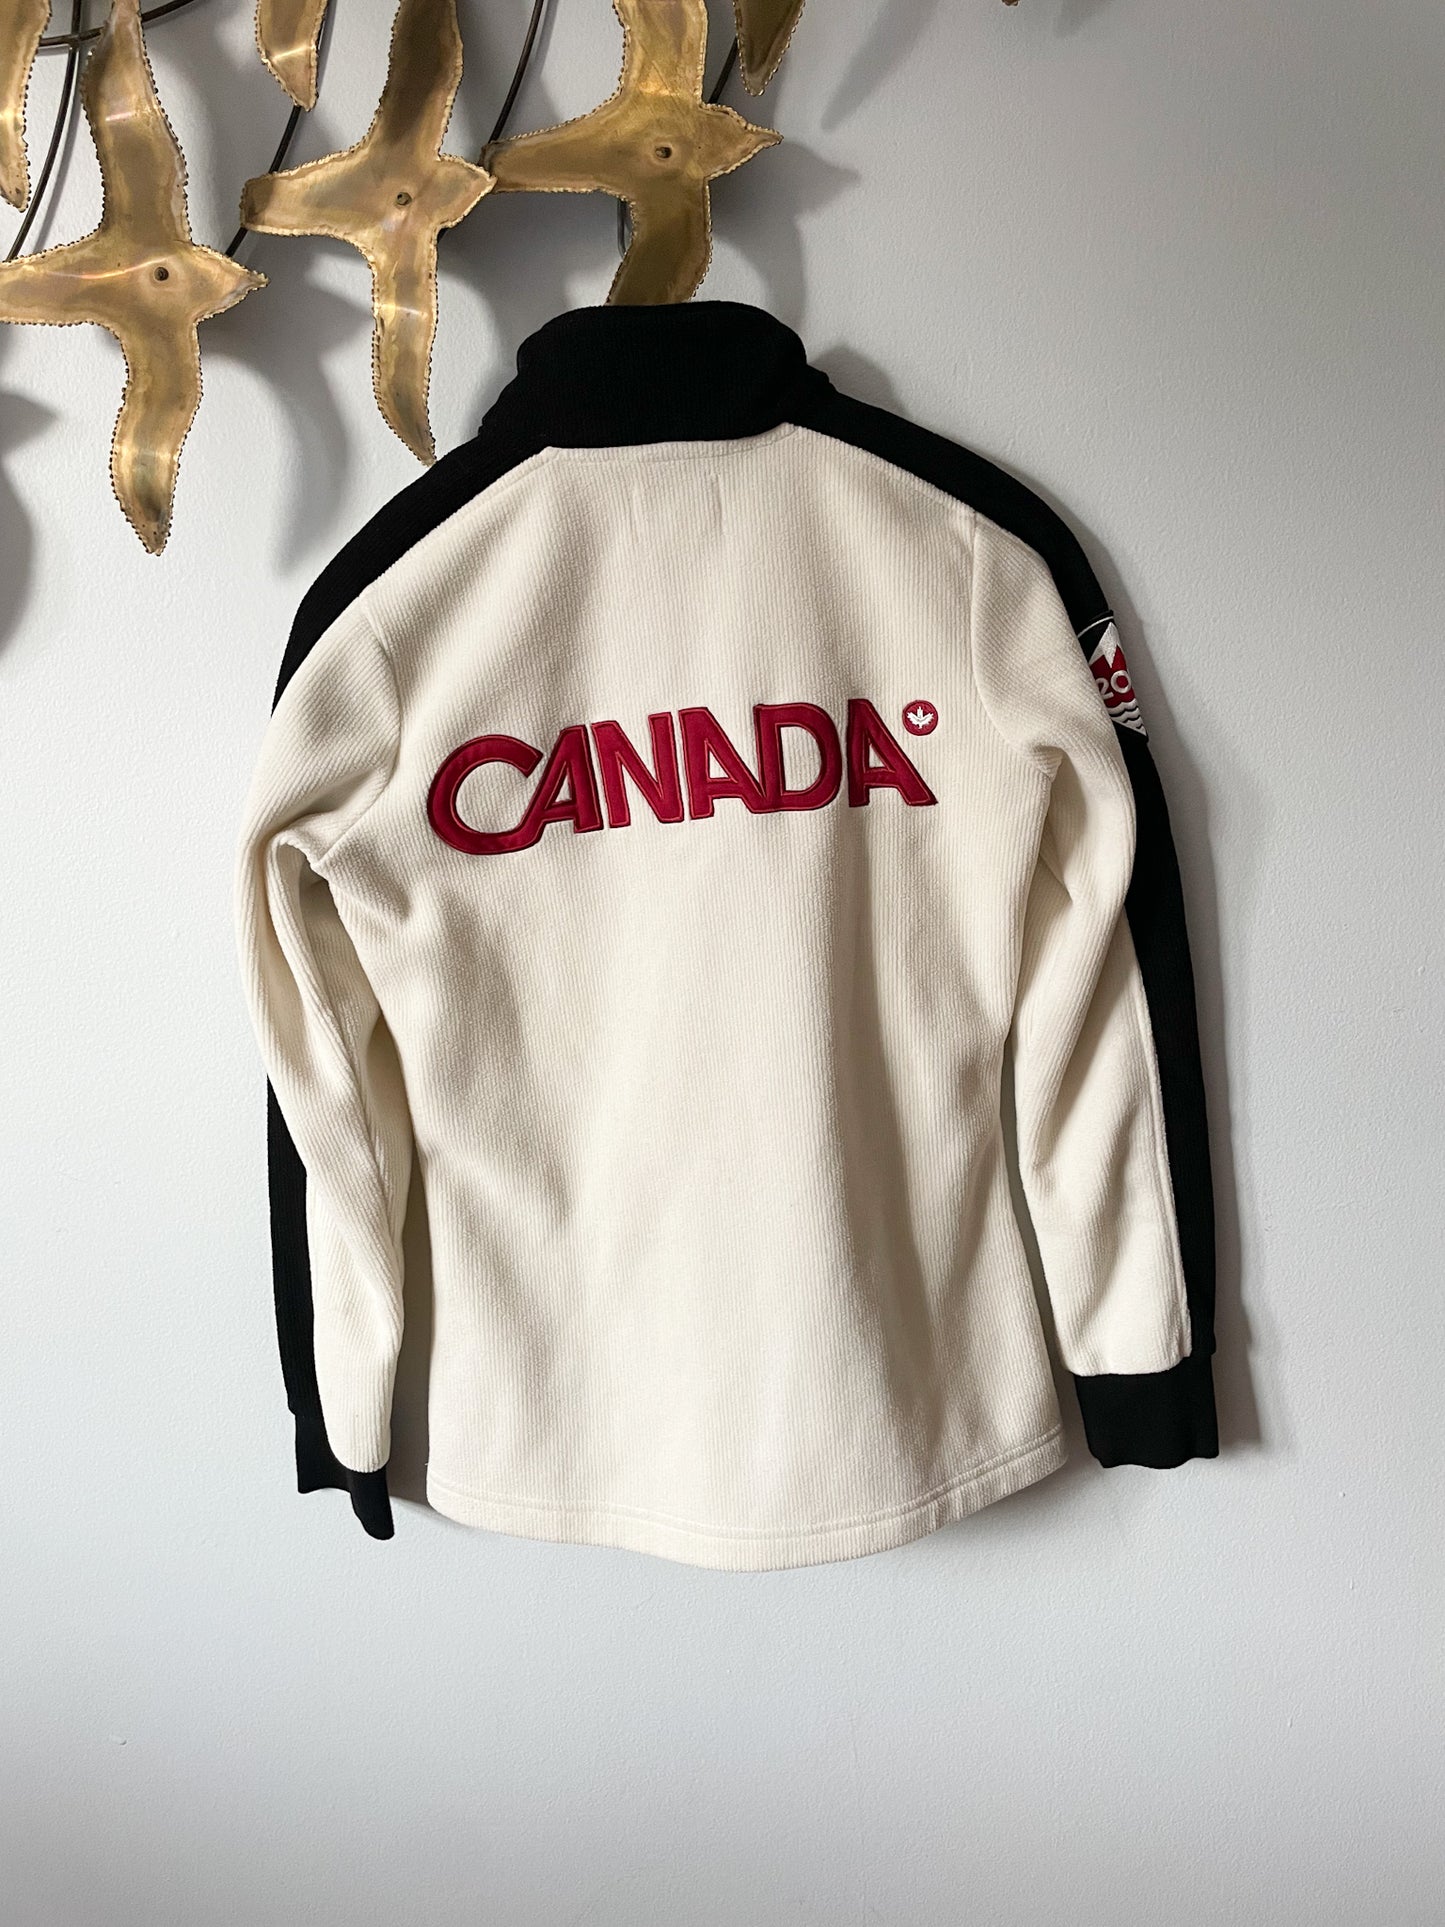 Hudson's Bay Co Canada 2010 Olympics White Half Zip Fleece Sweater with Patch - XS/S